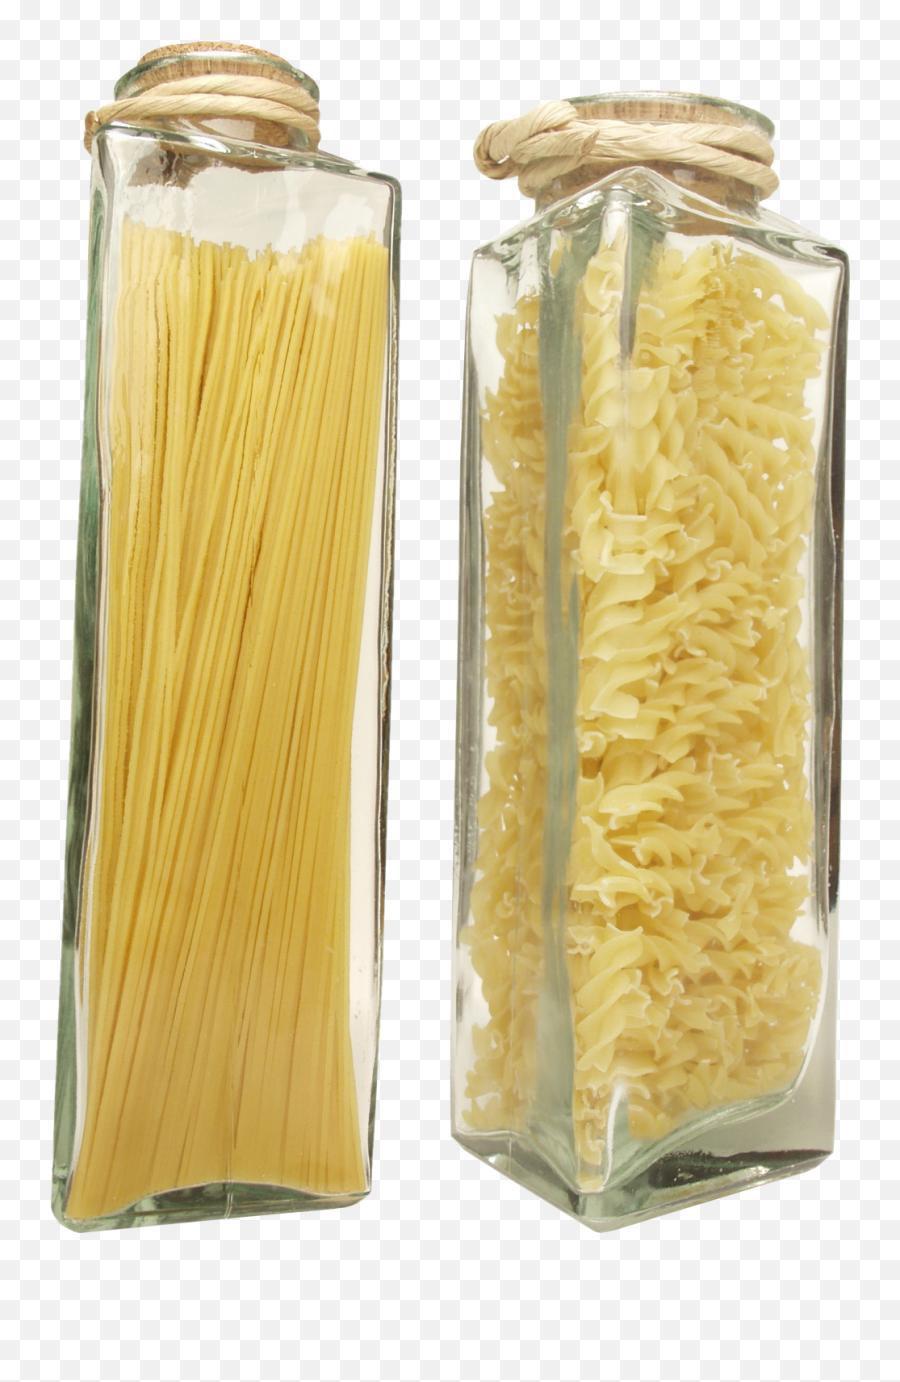 Spaghetti Png On Download - High Quality Image For Free Here Emoji,Noodle Emojii